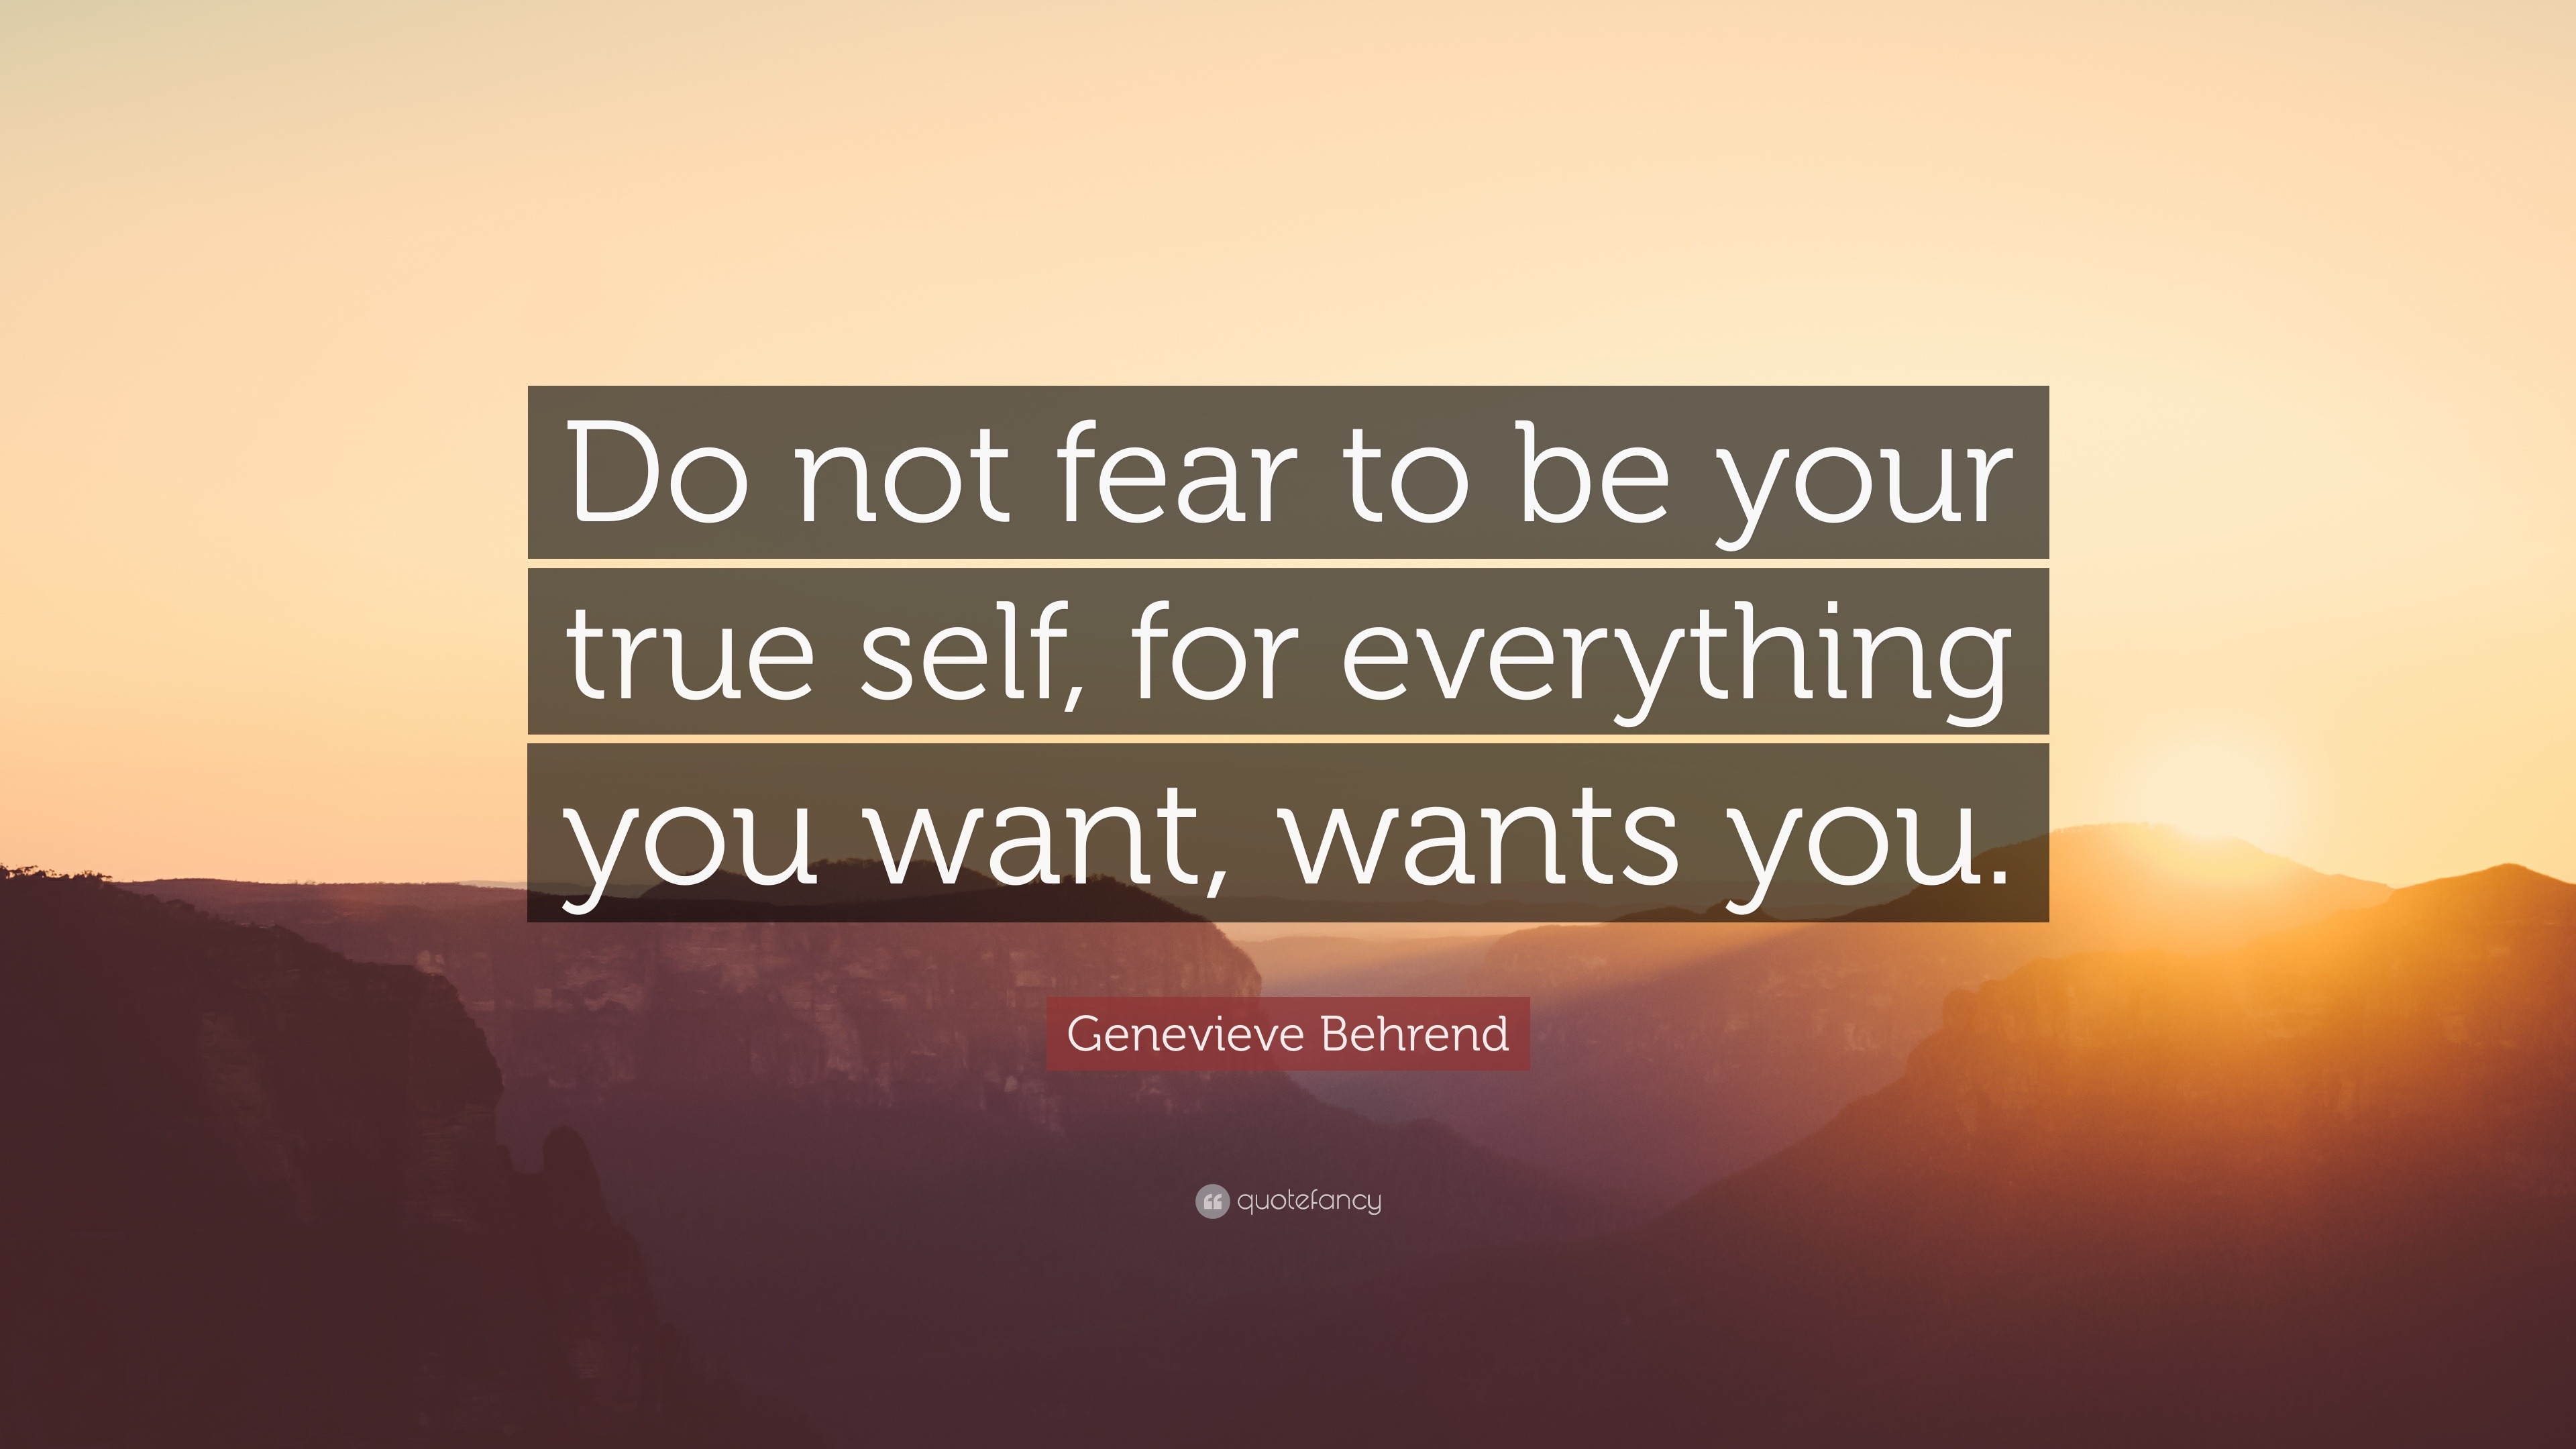 Genevieve Behrend Quote: “Do not fear to be your true self, for everything  you want, wants